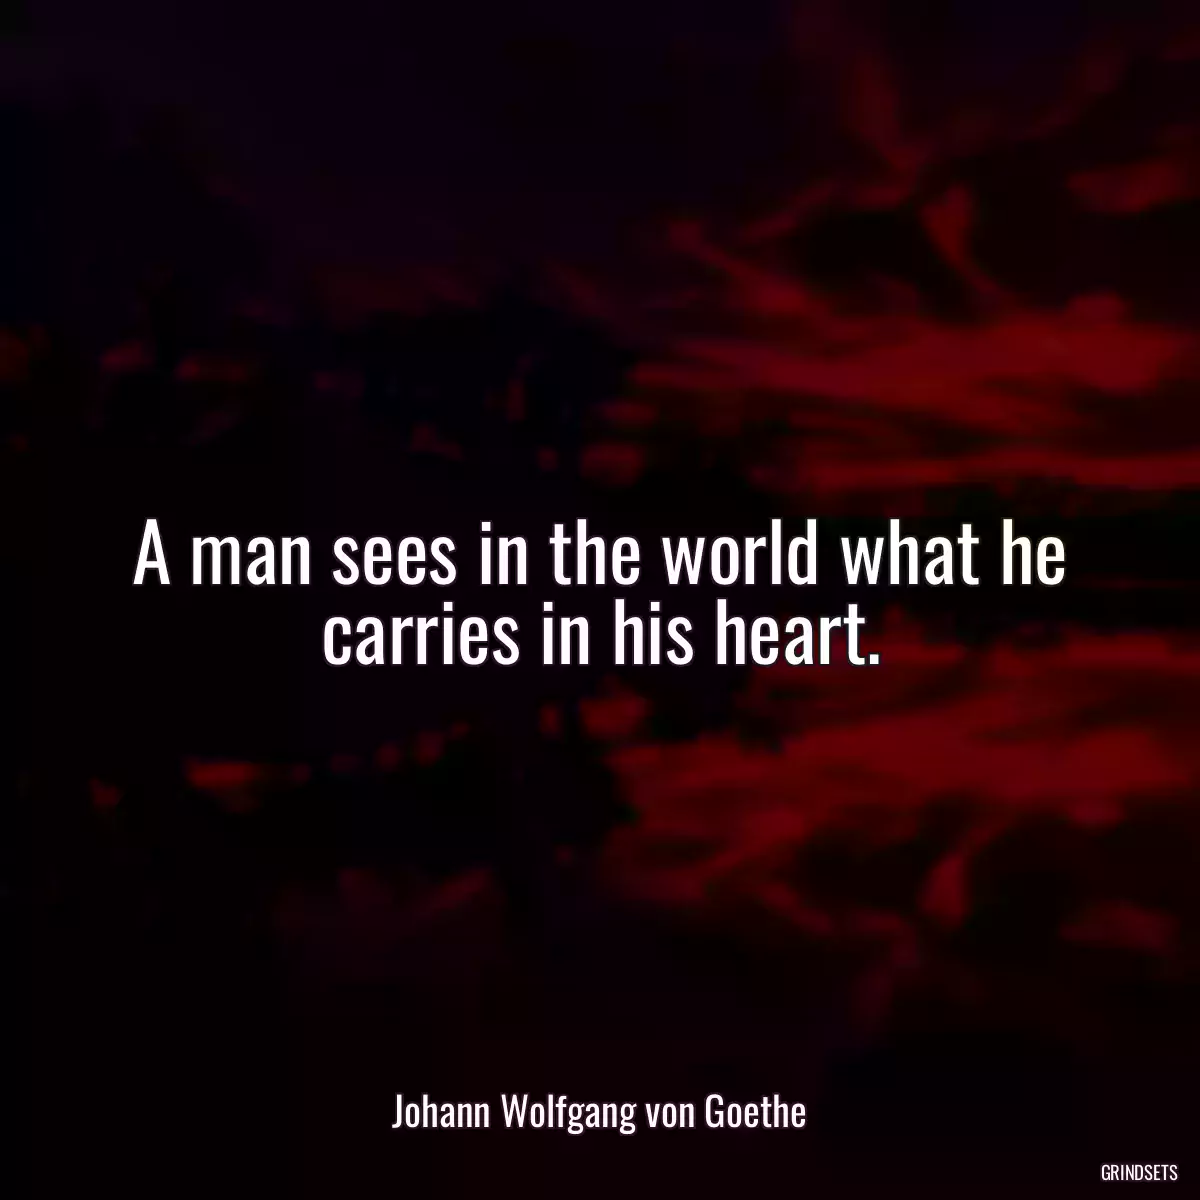 A man sees in the world what he carries in his heart.